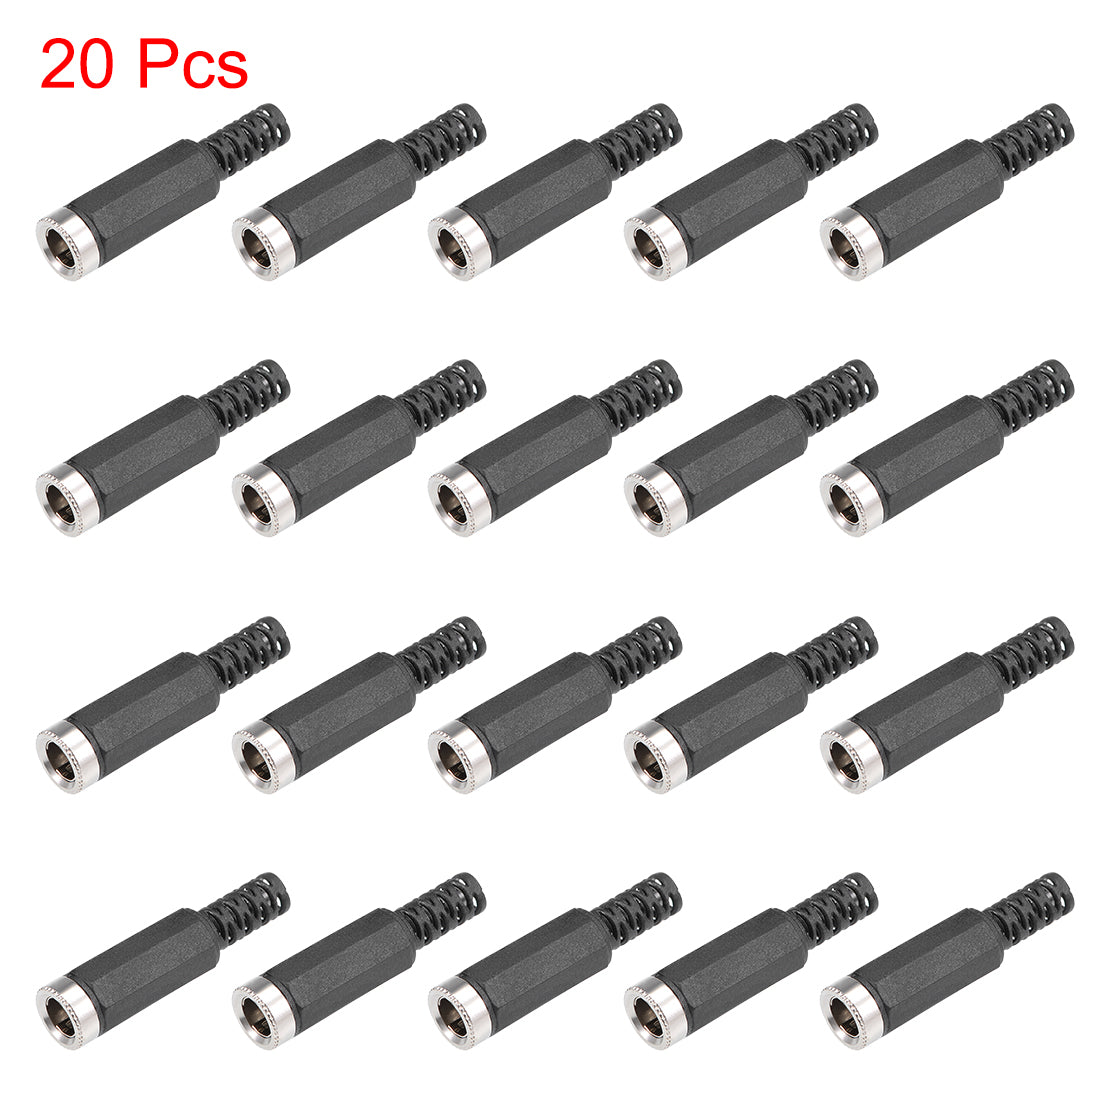 uxcell Uxcell 20pcs 5.5mm x 2.1mm Female DC Power Jack Connector Socket Adapter for Power Supply Connector